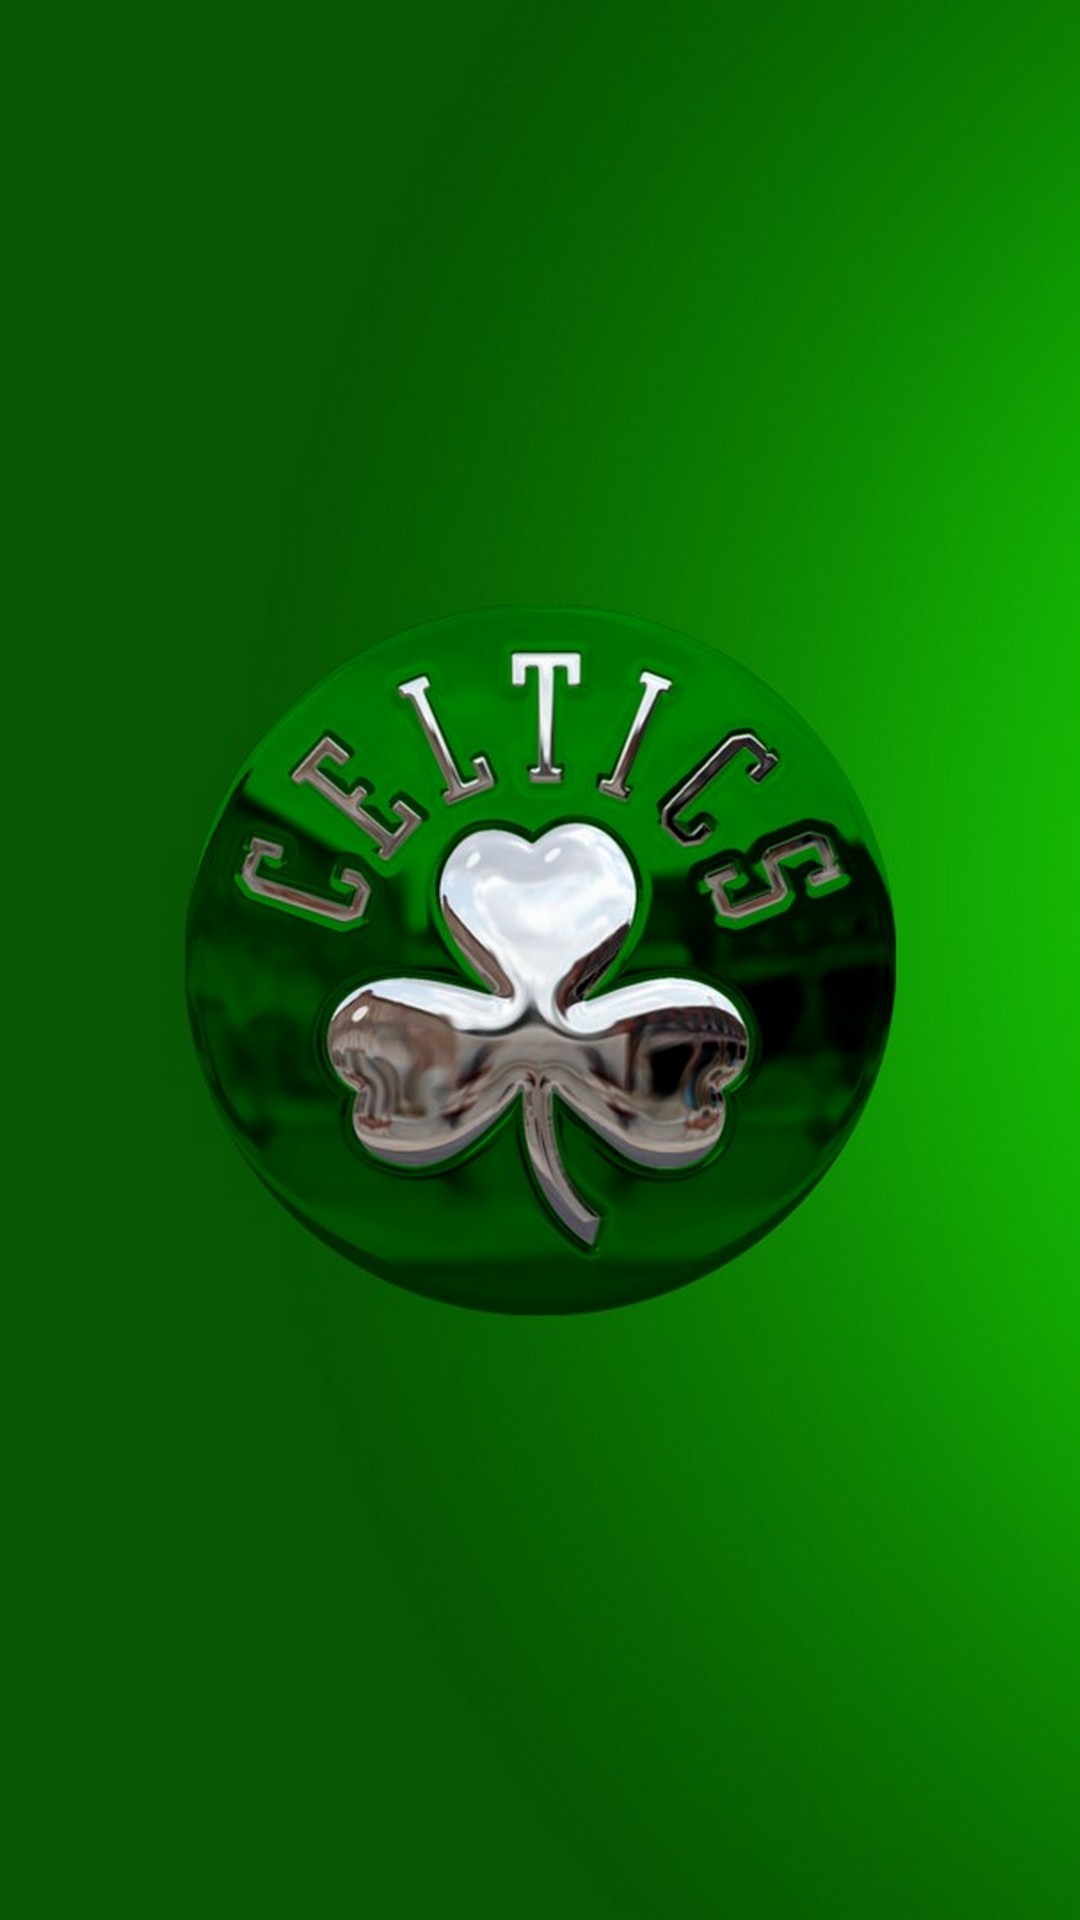 Boston Celtics Wallpaper For Android With Image Resolution - Boston Celtics Wallpaper 2019 - HD Wallpaper 